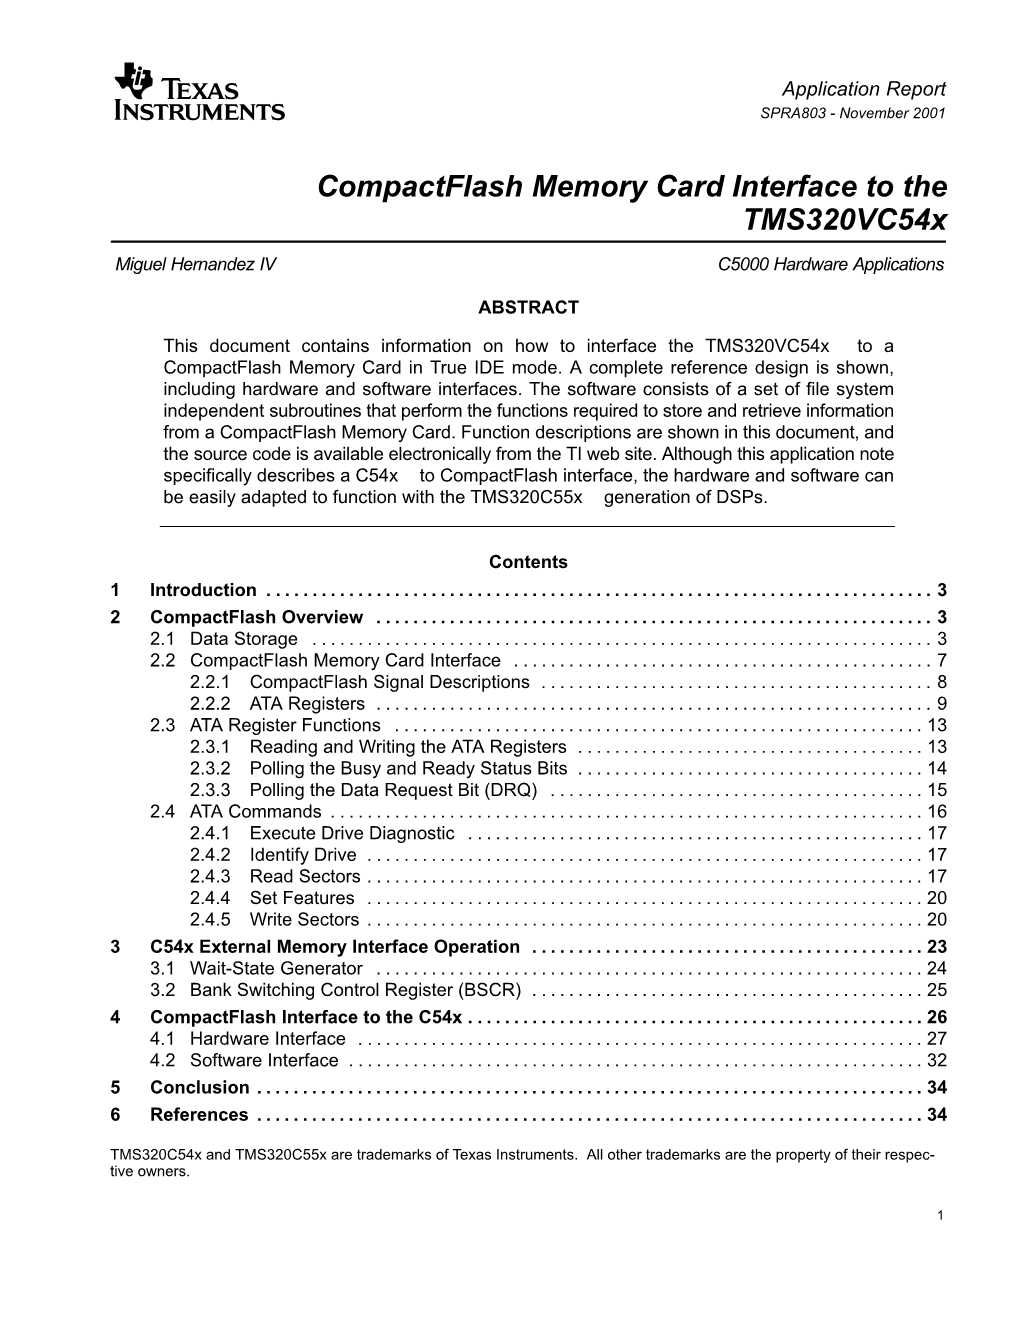 Compactflash Memory Card Interface to the Tms320vc54x